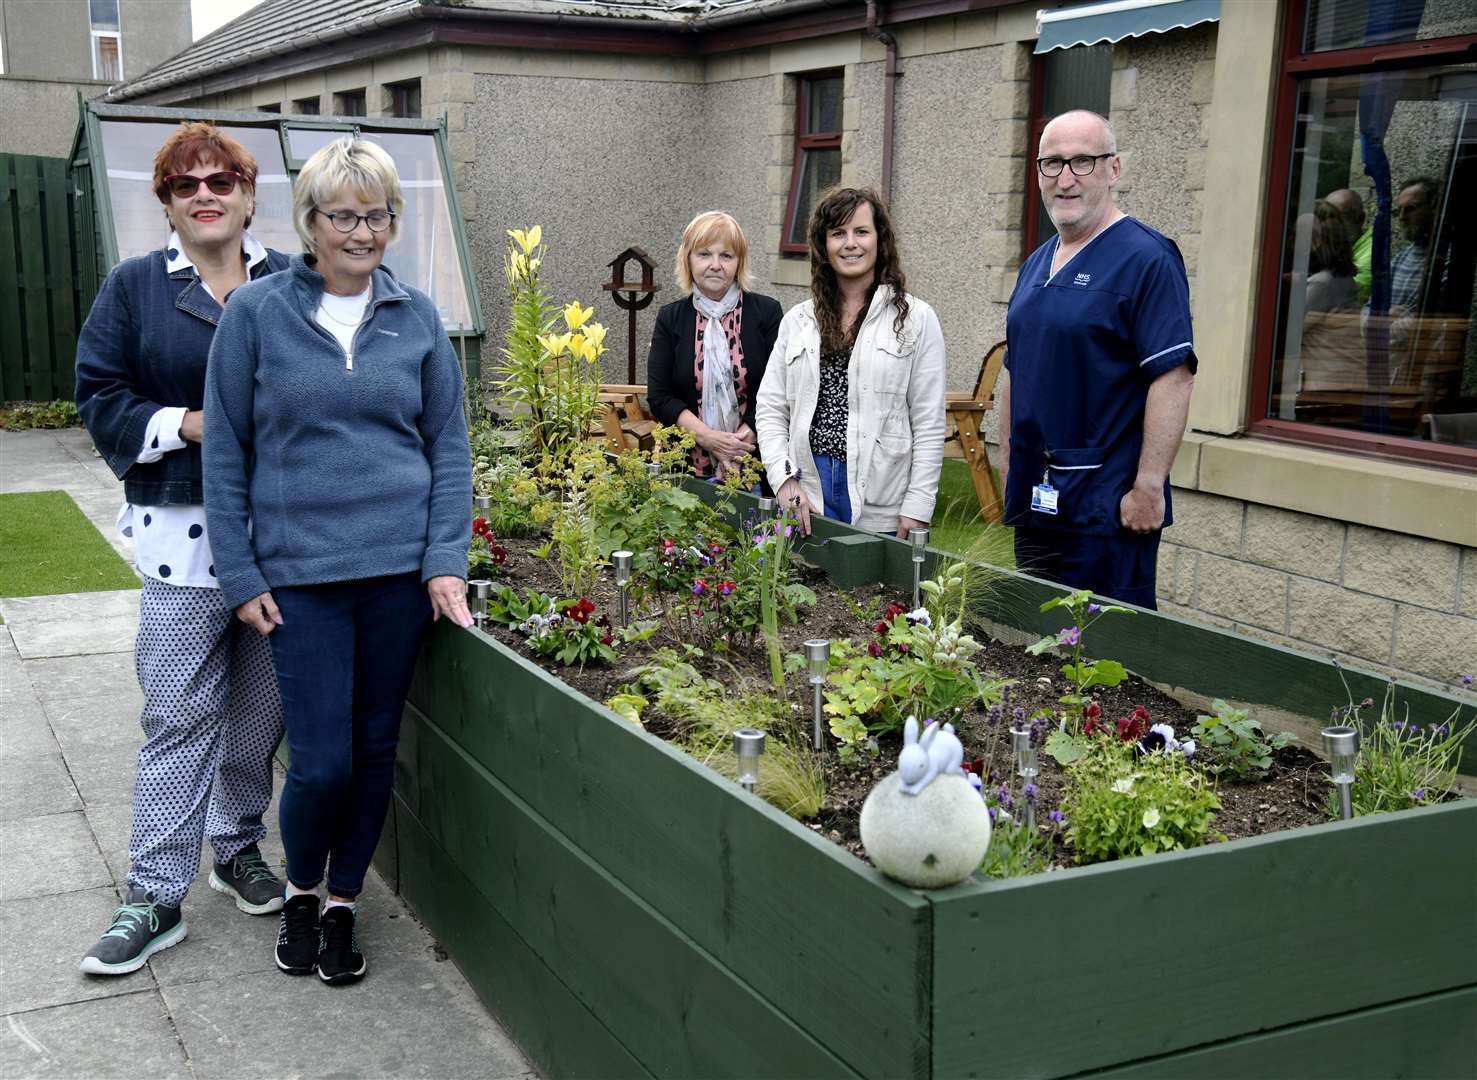 Admiring the new raised flower bed are (from left) Friends members Christine Allan, Rhonda McIntosh and Lesley Davidson, Freinds chairwoman Megan Walls and Glen Erskine, senior charge nurse at Muirton Ward. Picture: Beth Taylor